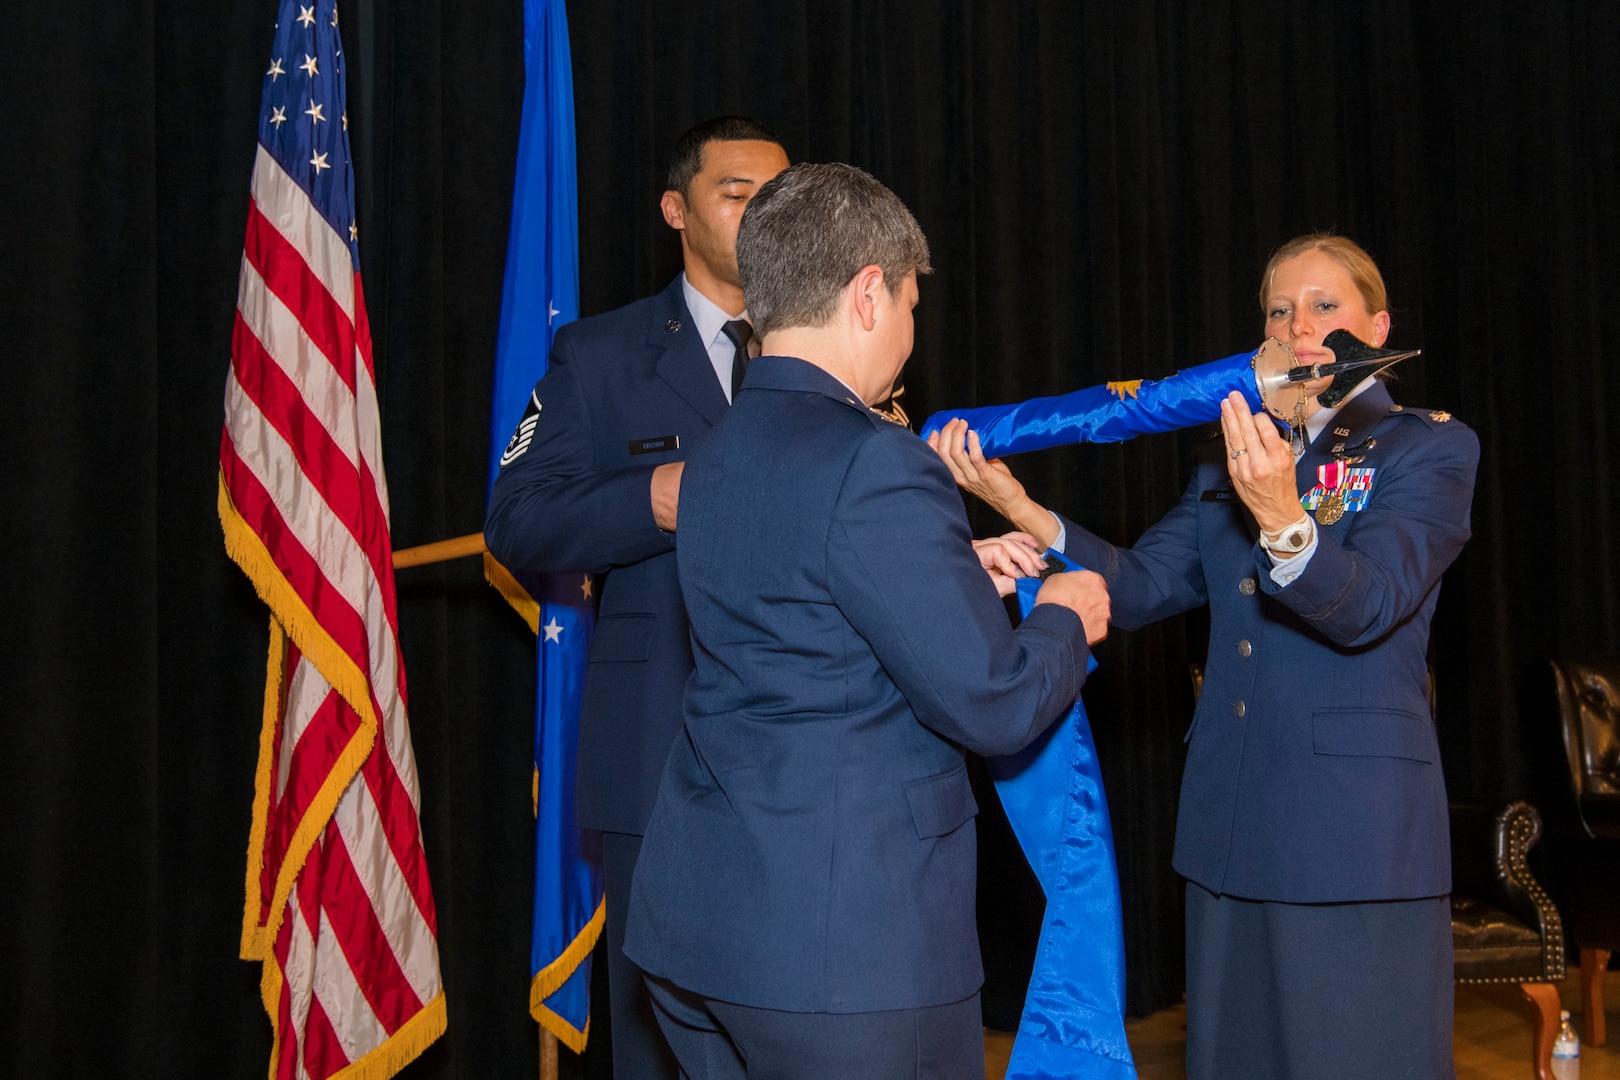 Col. Heidi A. Paulson, Air Force Manpower Analysis Agency commander, Lt. Col. Jessica Corea, 1st Manpower Requirements Squadron commander, and Master Sgt. Waymon Brown, Jr., 1st MRS NCO in charge of A-branch, furl the unit flag during the inactivation ceremony Jan. 9, 2020, at Joint Base San Antonio-Randolph, Texas. It is military custom to furl and encase the flag upon the completion of the organization’s mission.